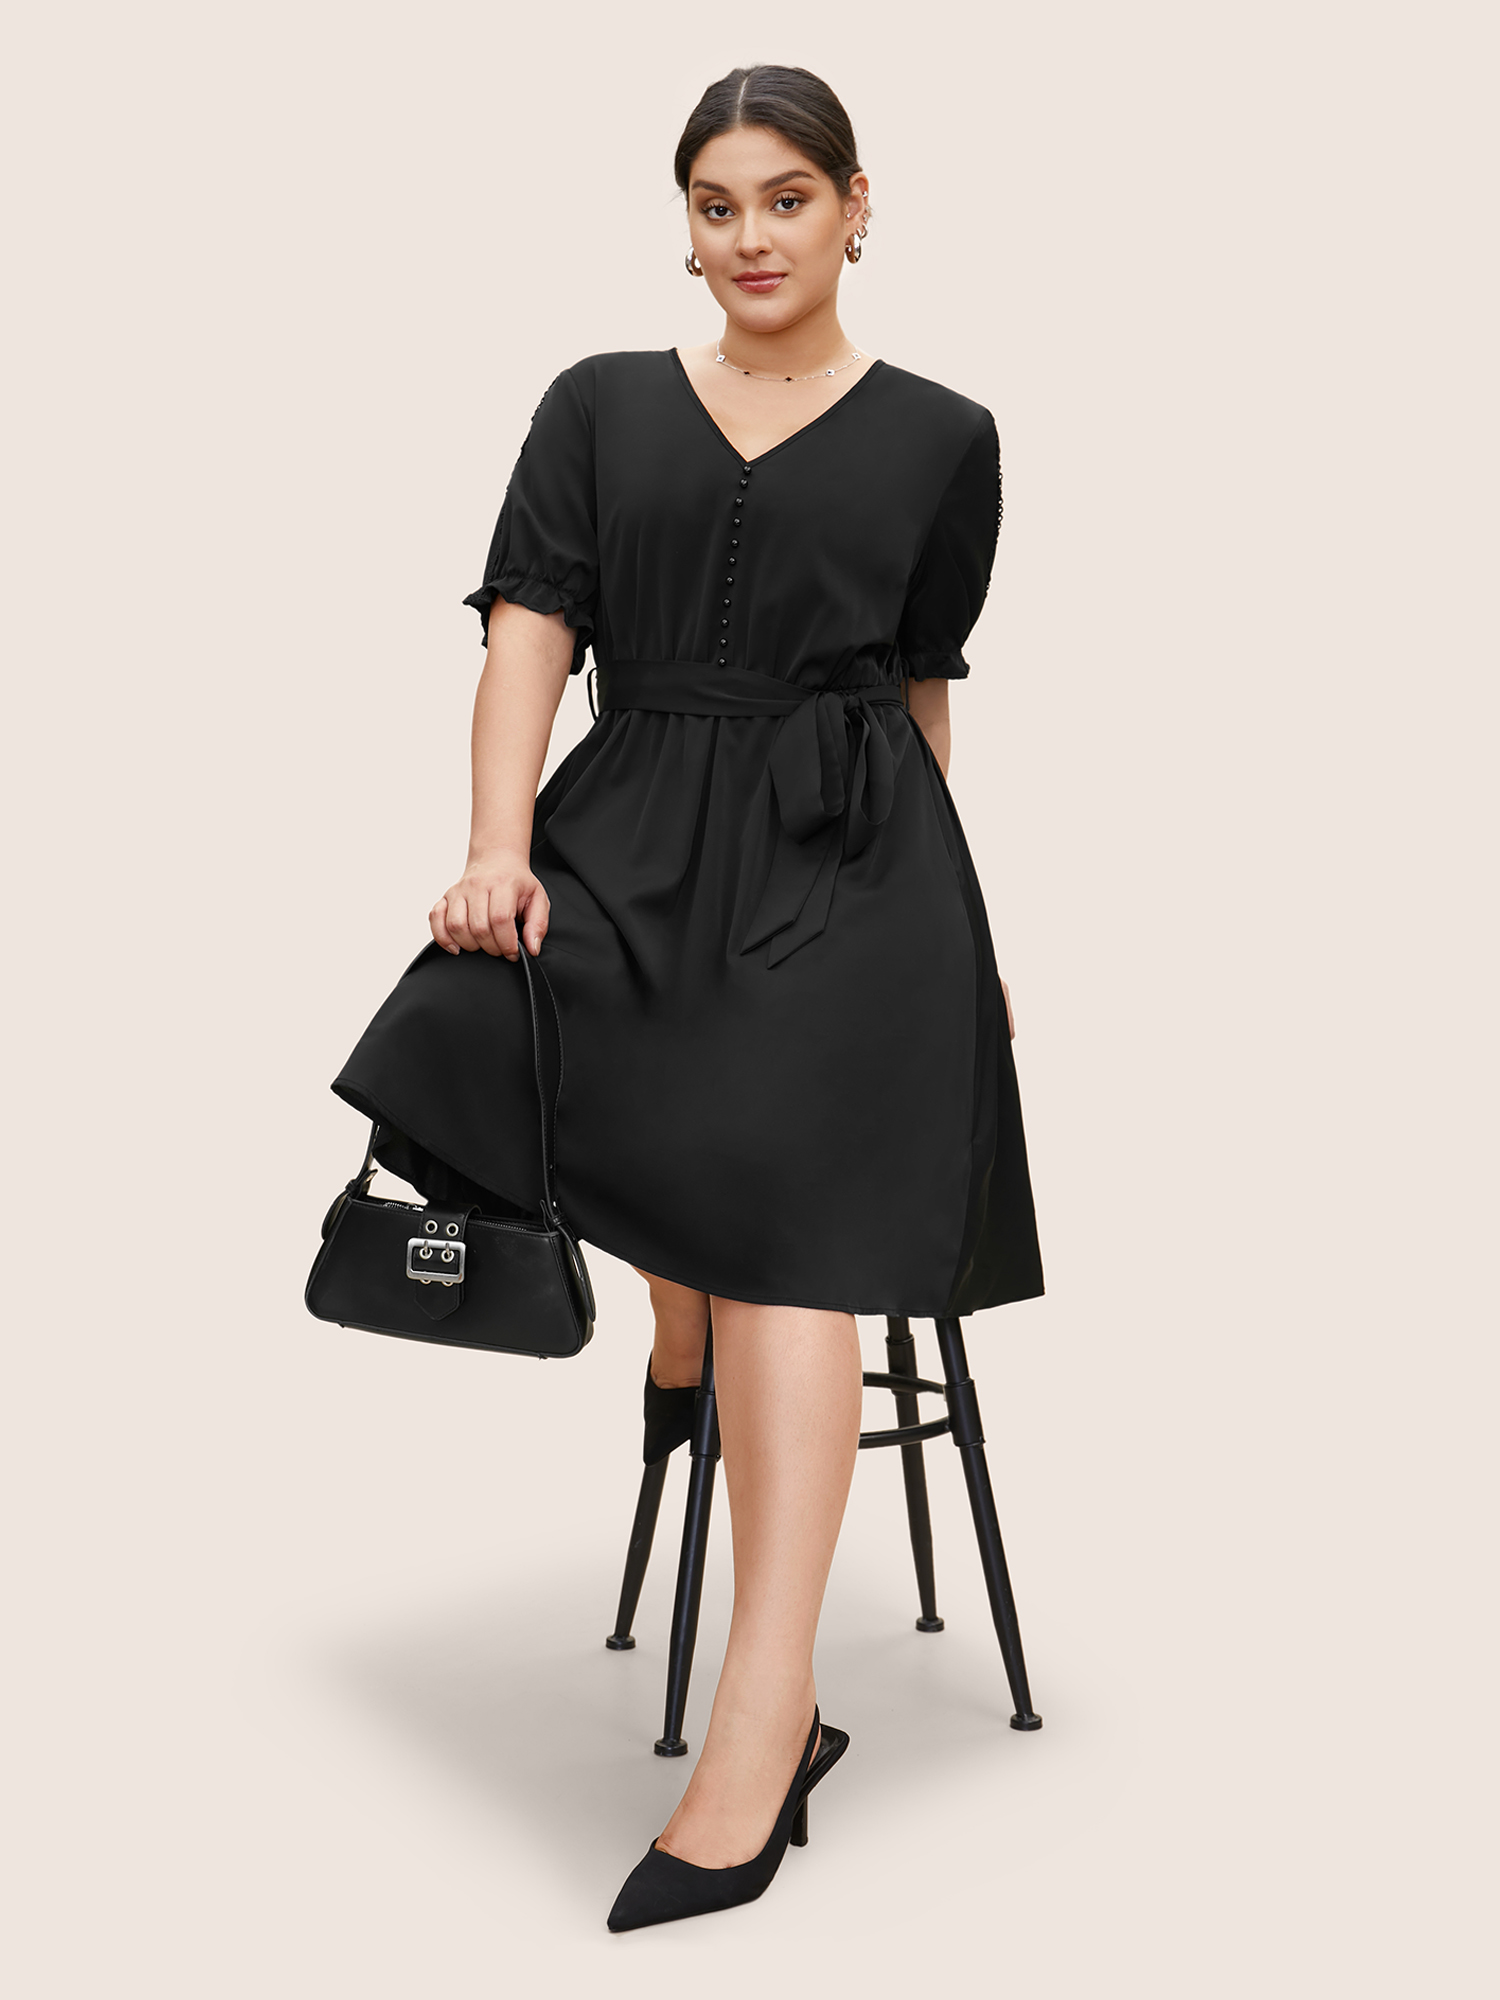 

Plus Size Solid Lace Panel Frill Trim Belted Dress Black Women At the Office Belted Heart neckline Short sleeve Curvy BloomChic